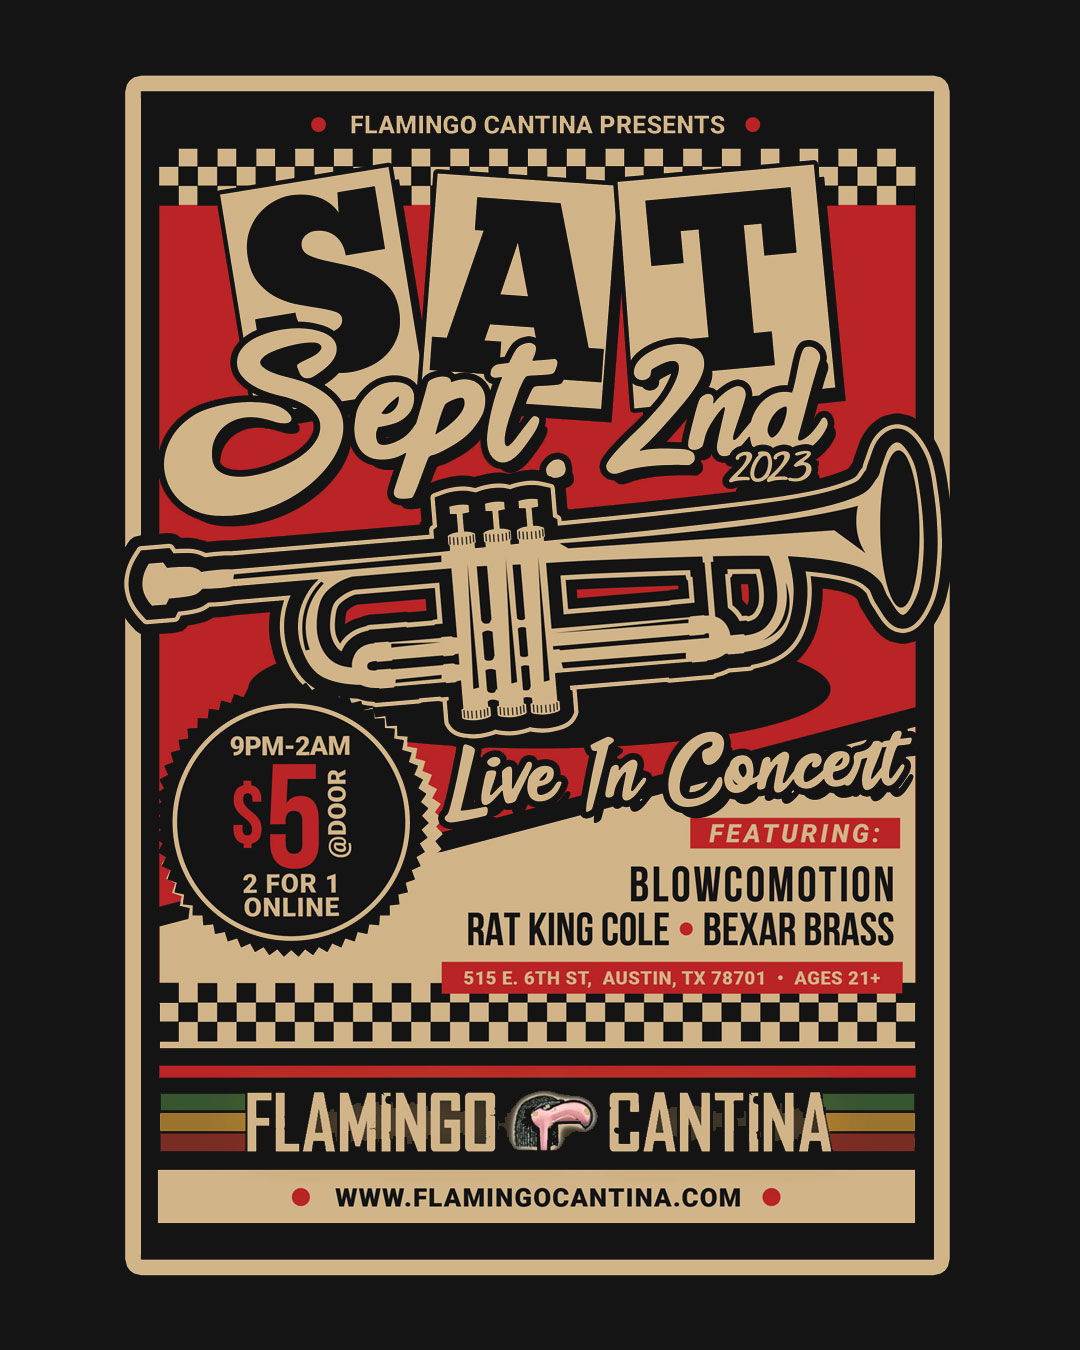 Poster with trumpet and details about the show: Sat. Sept 2nd, Live in Concert, featuring Blowcomotion, Rat King Cole, Bexar Brass, 9pm to 2am, $5 at the door, 2 for 1 online.